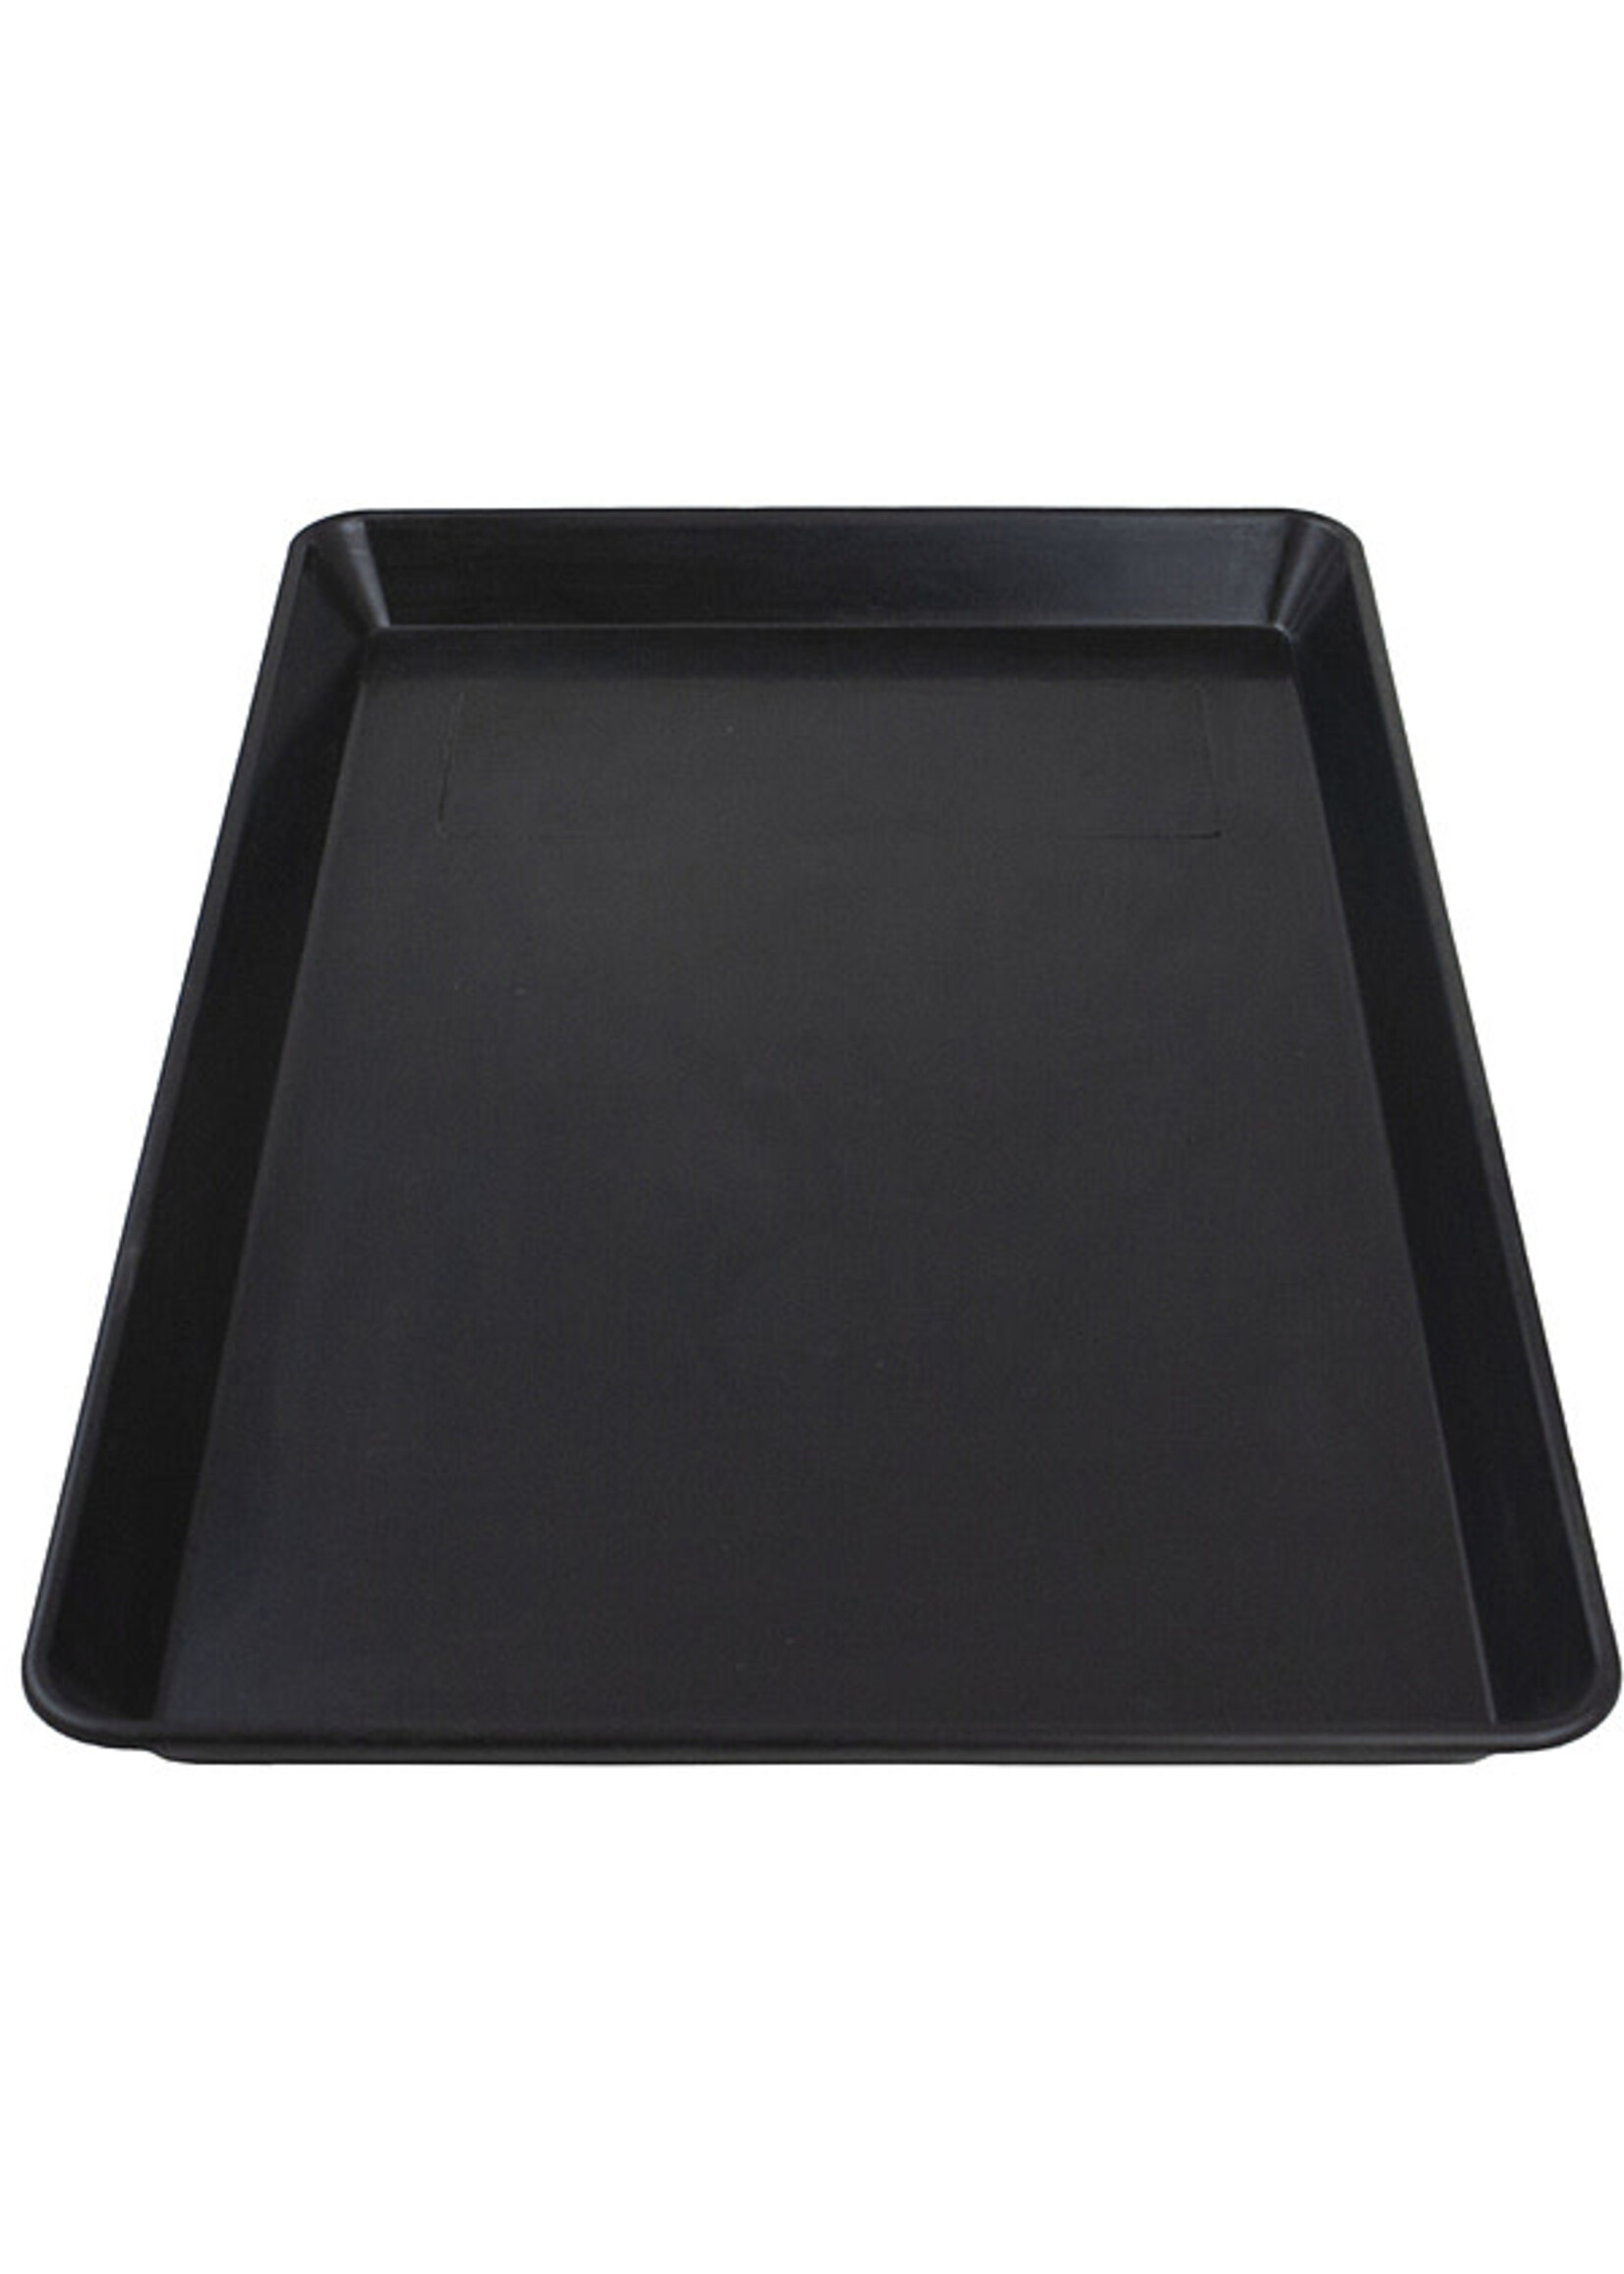 Unleashed Unleashed - Plastic Tray 42x3x28"